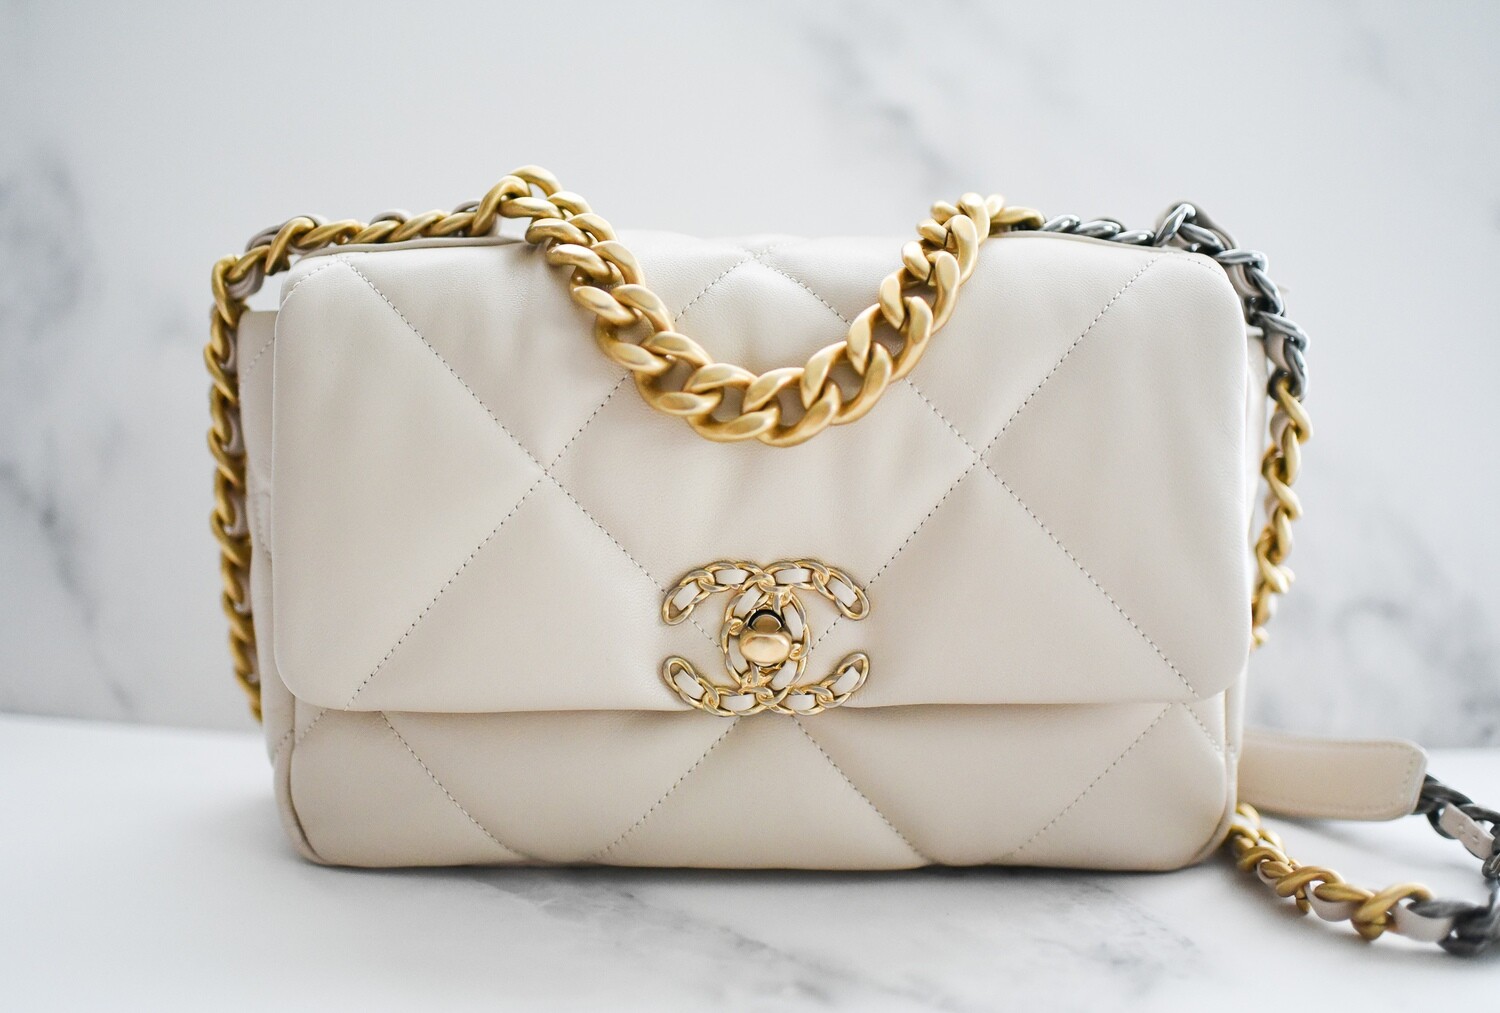 Excellent Used CHANEL 19 Small Flap Bag in Beige Goatskin Mix